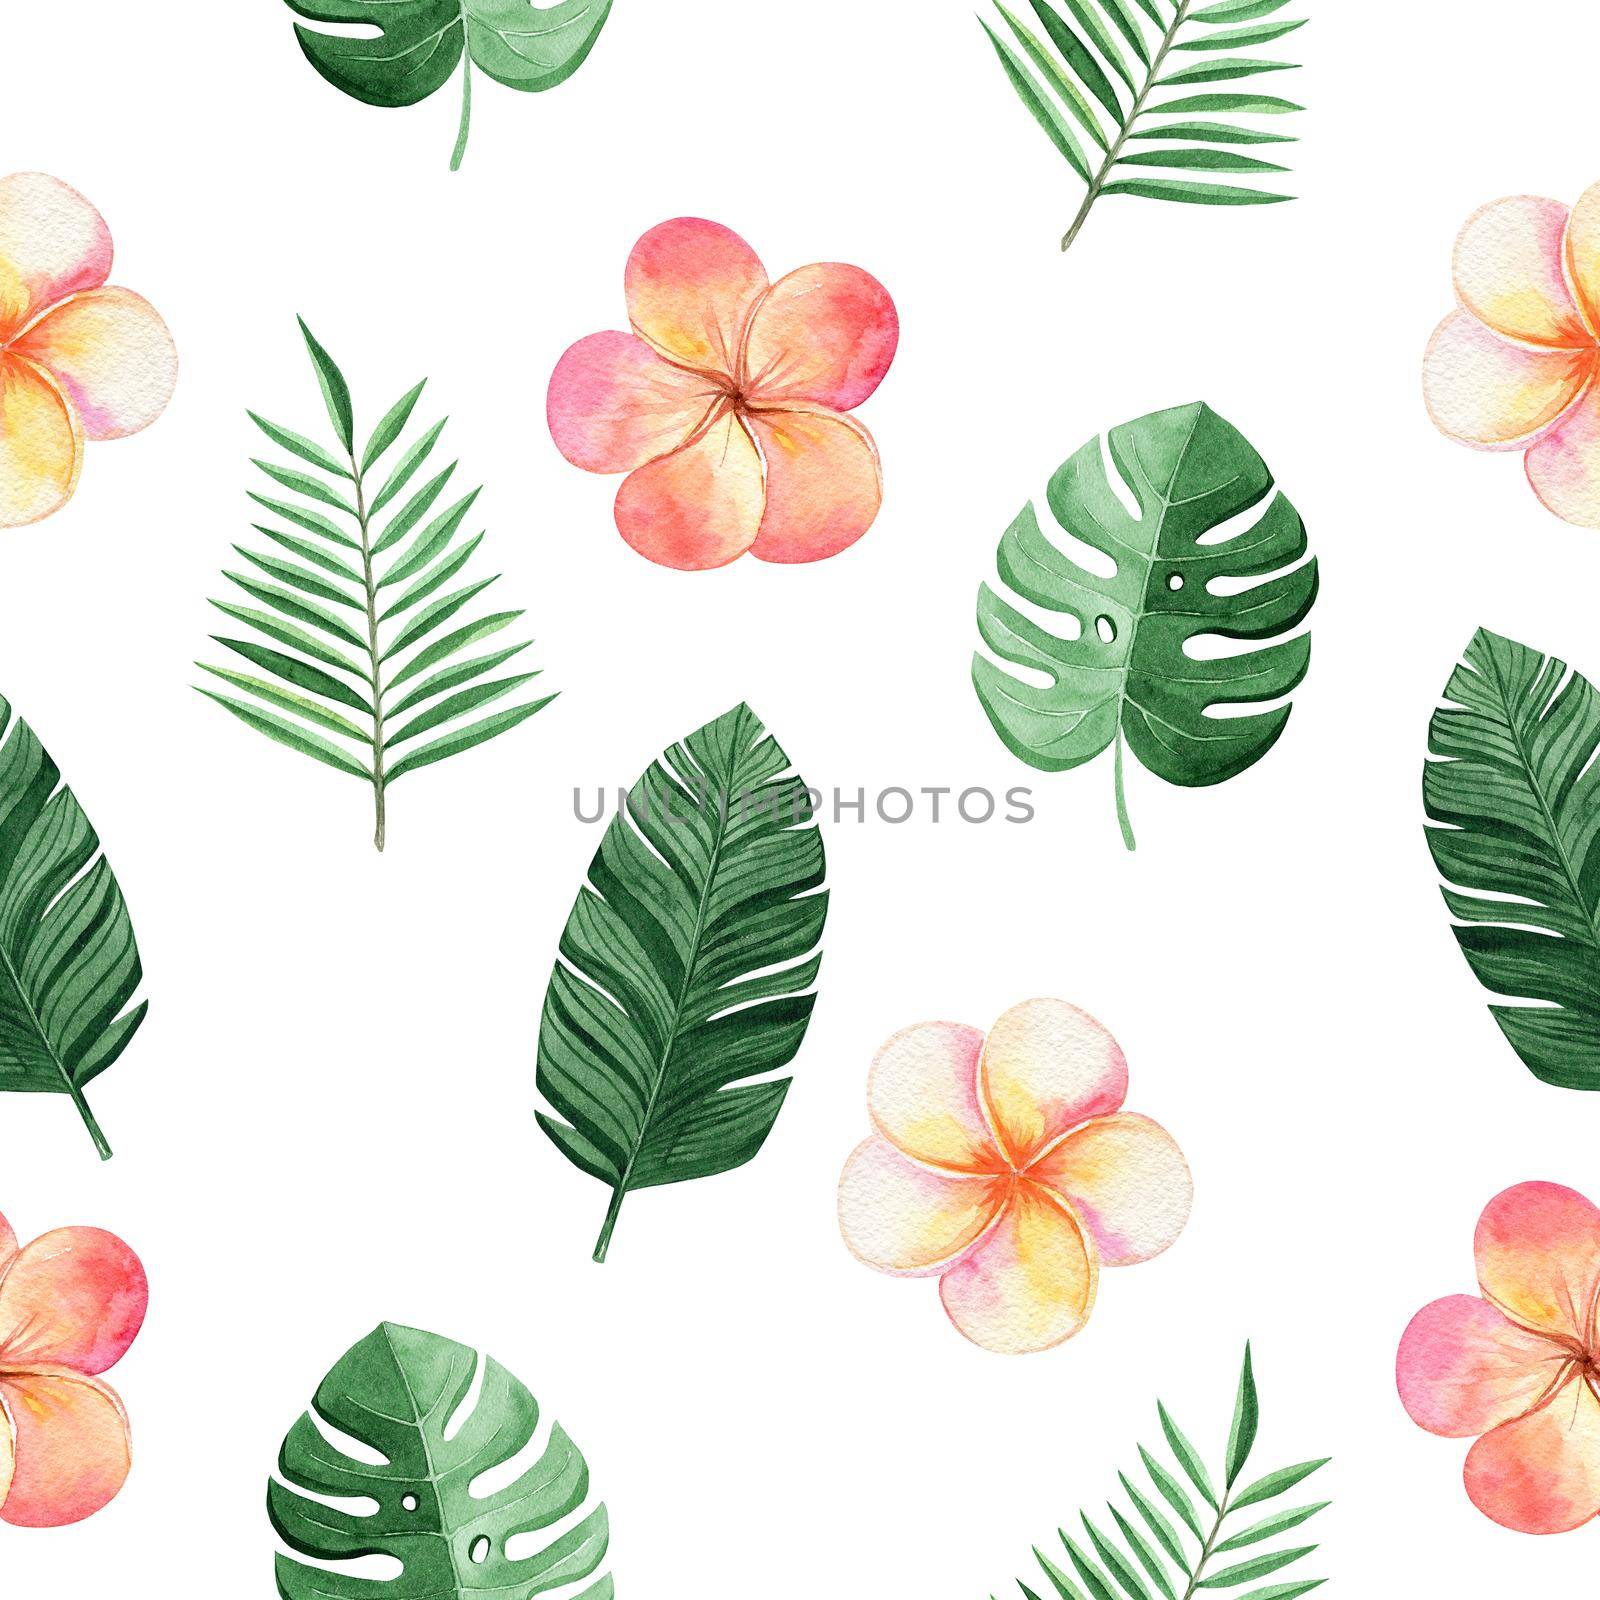 watercolor tropical flower and palm leaves seamless pattern with plumeria and monstera plants on white background for fabric, textile, branding, invitations, scrapbooking, wrapping